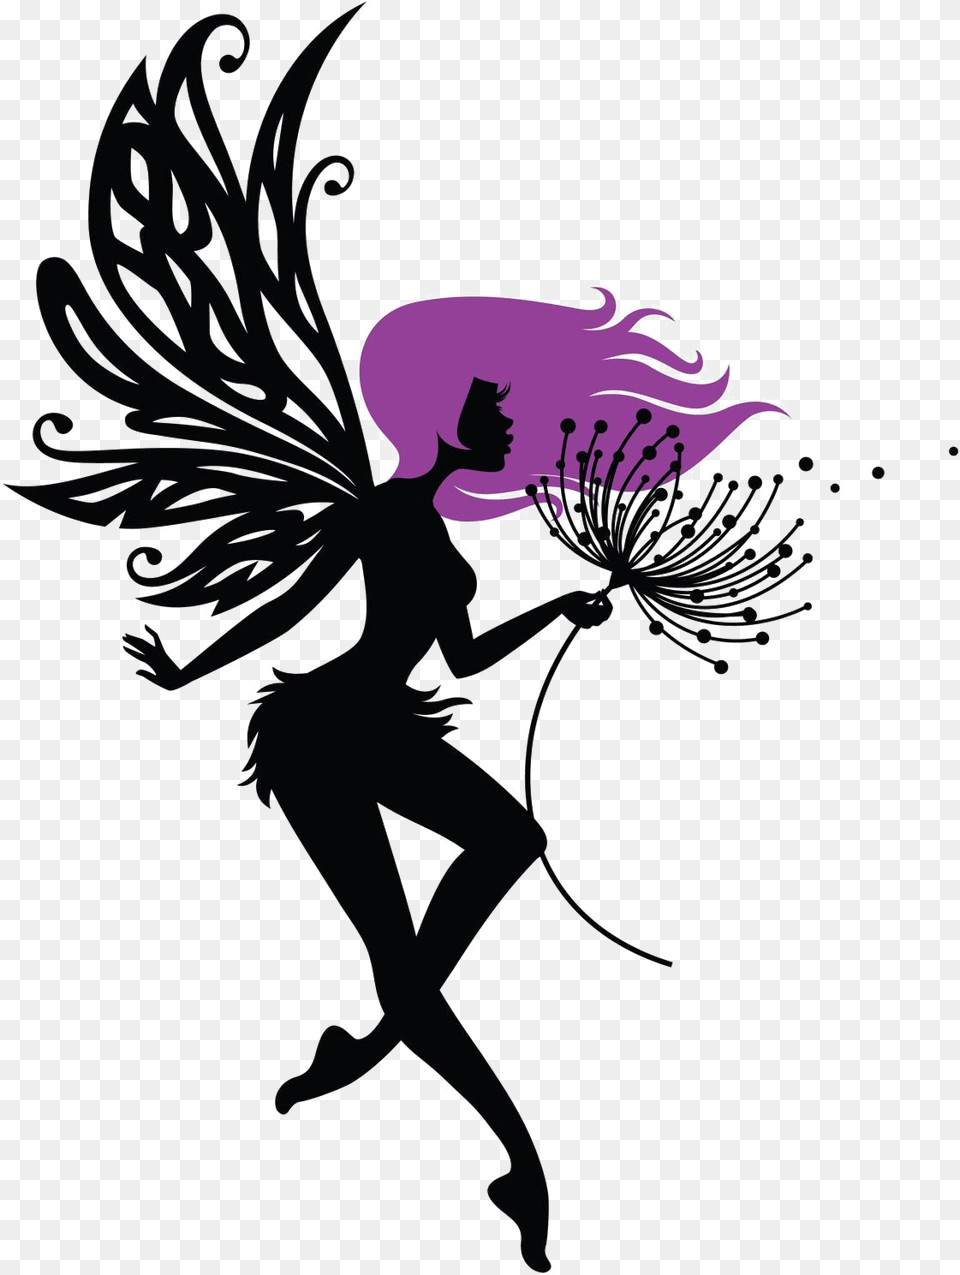 Fairy Tattoos Transparent Image Fairy Vector Tattoo, Flower, Plant, Leisure Activities, Dancing Png